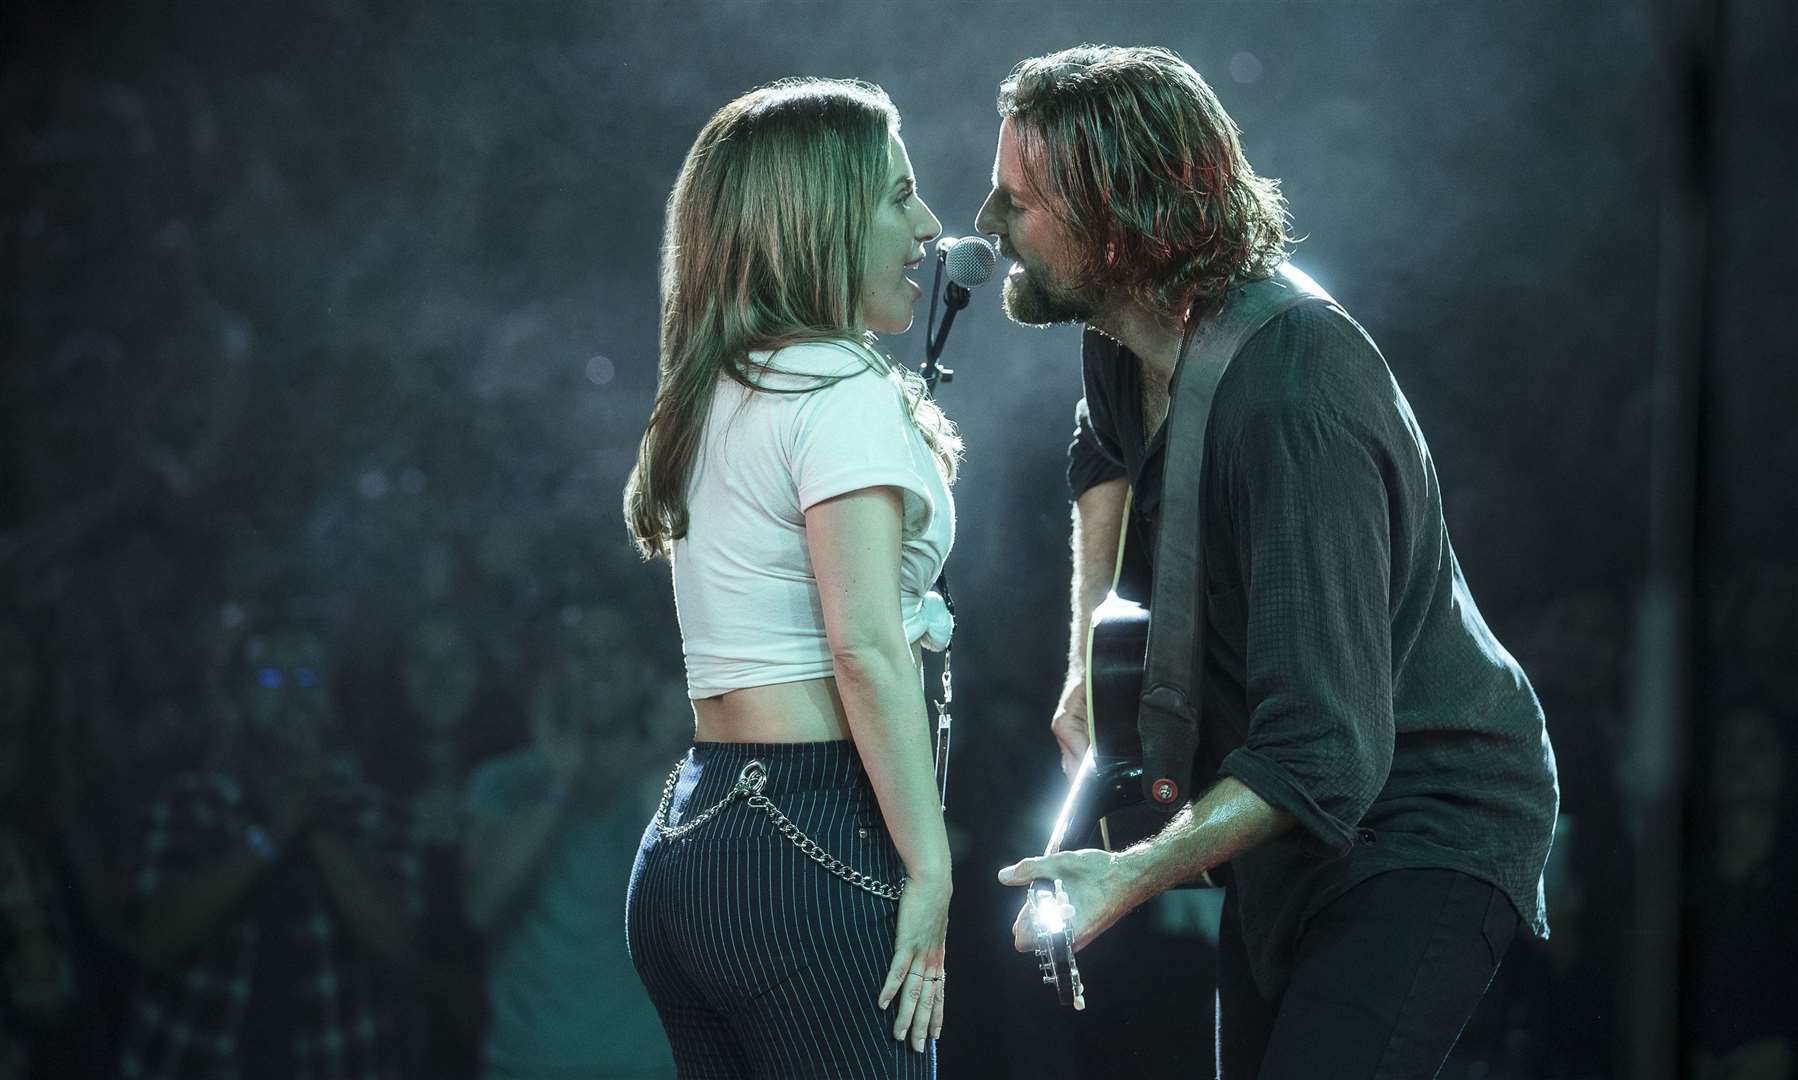 Lukas Nelson & Promise of the Real, who recently collaborated with Lady Gaga and Bradley Cooper for the multi-award winning A Star is Born soundtrack for their blockbusting film will be at the festival Picture: Warner Bros. Entertainment Inc./Clay Enos